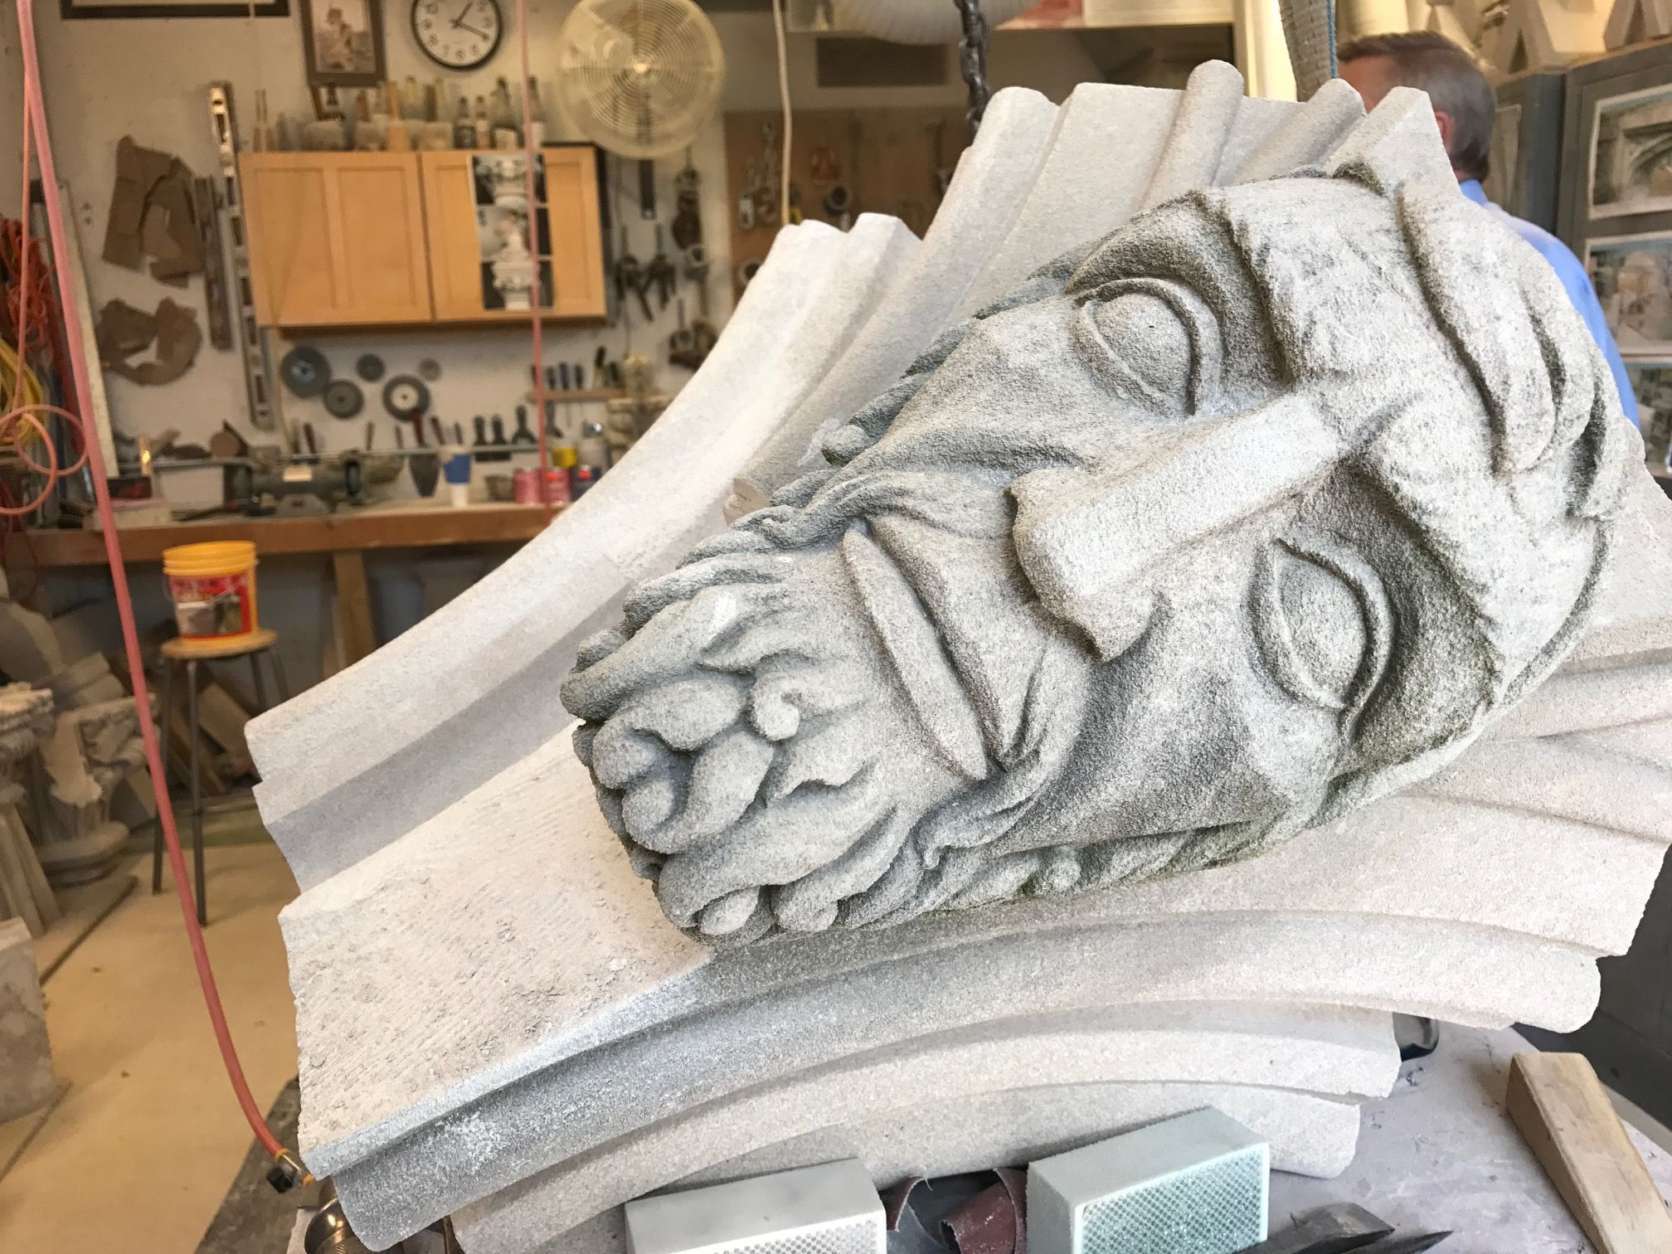 Some of the prophets do not have eyes. National Cathedral masons said the original carvers in the 1950's had artistic leeway in designing the prophets faces. (WTOP/Megan Cloherty)